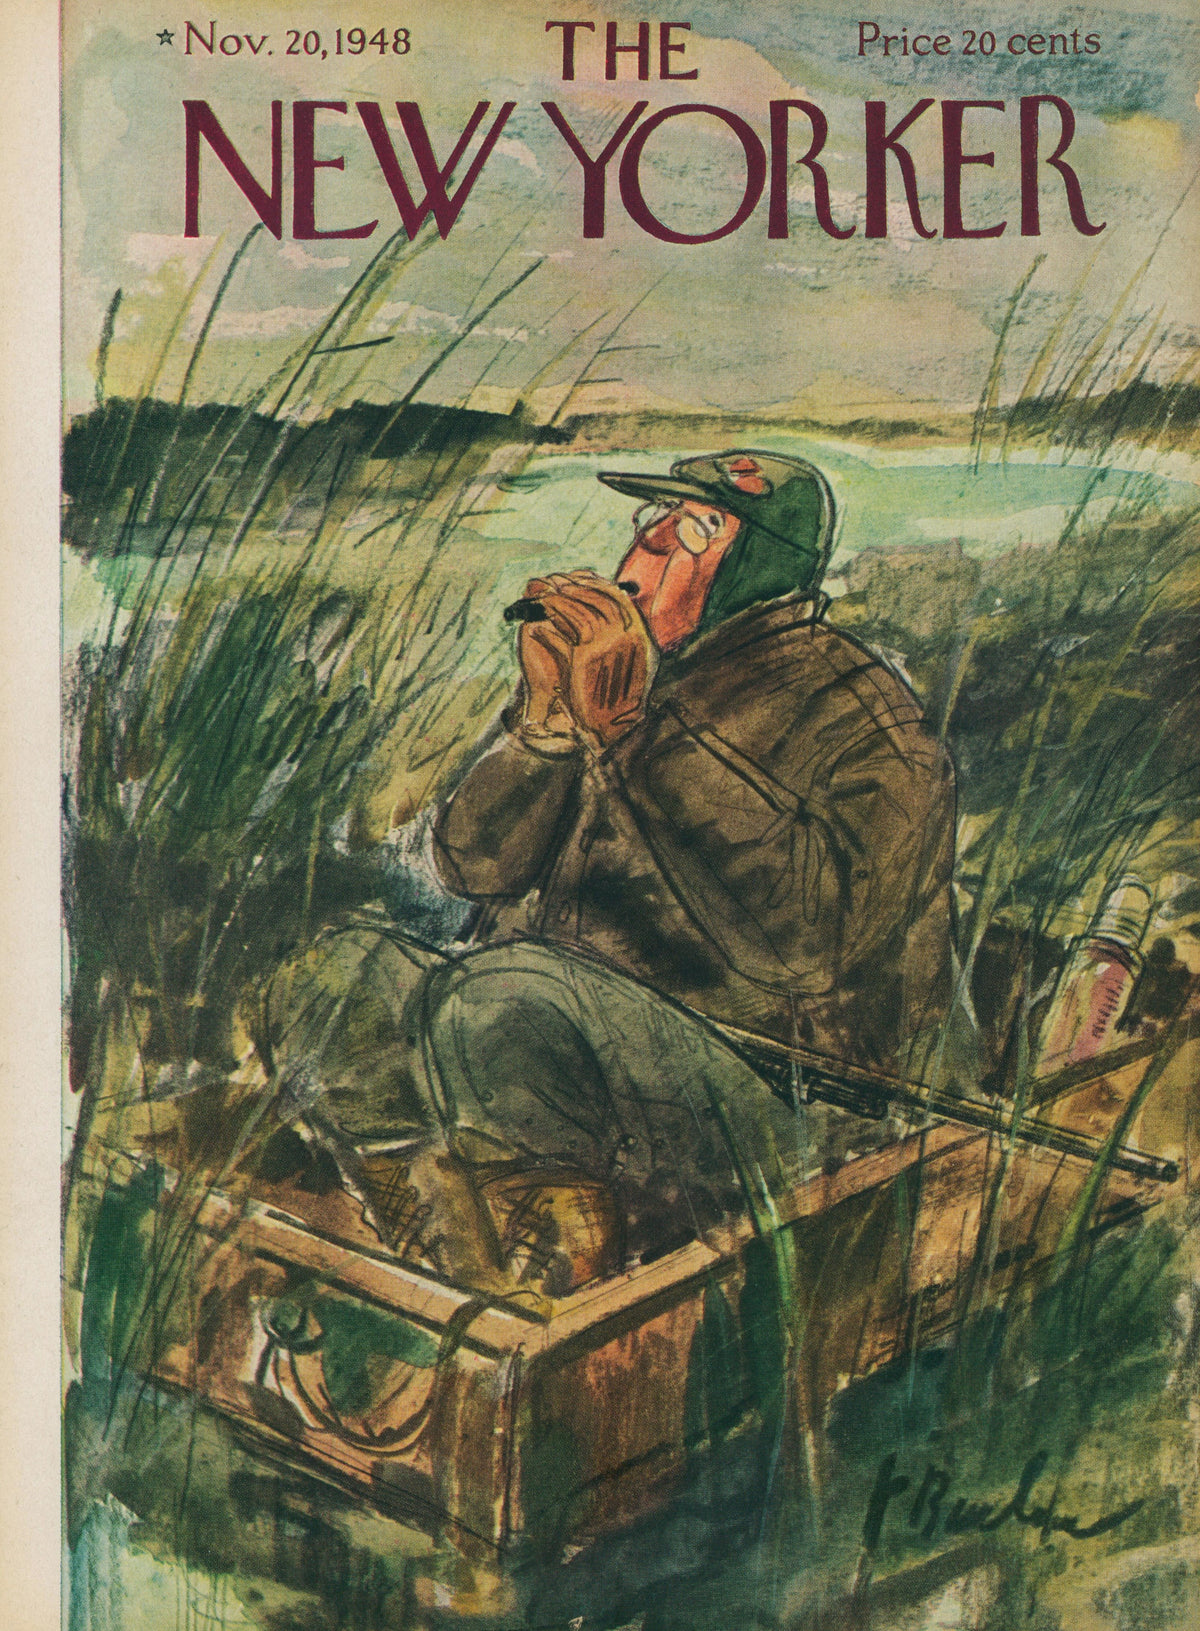 Fisherman- The New Yorker - Authentic Vintage Antique Print